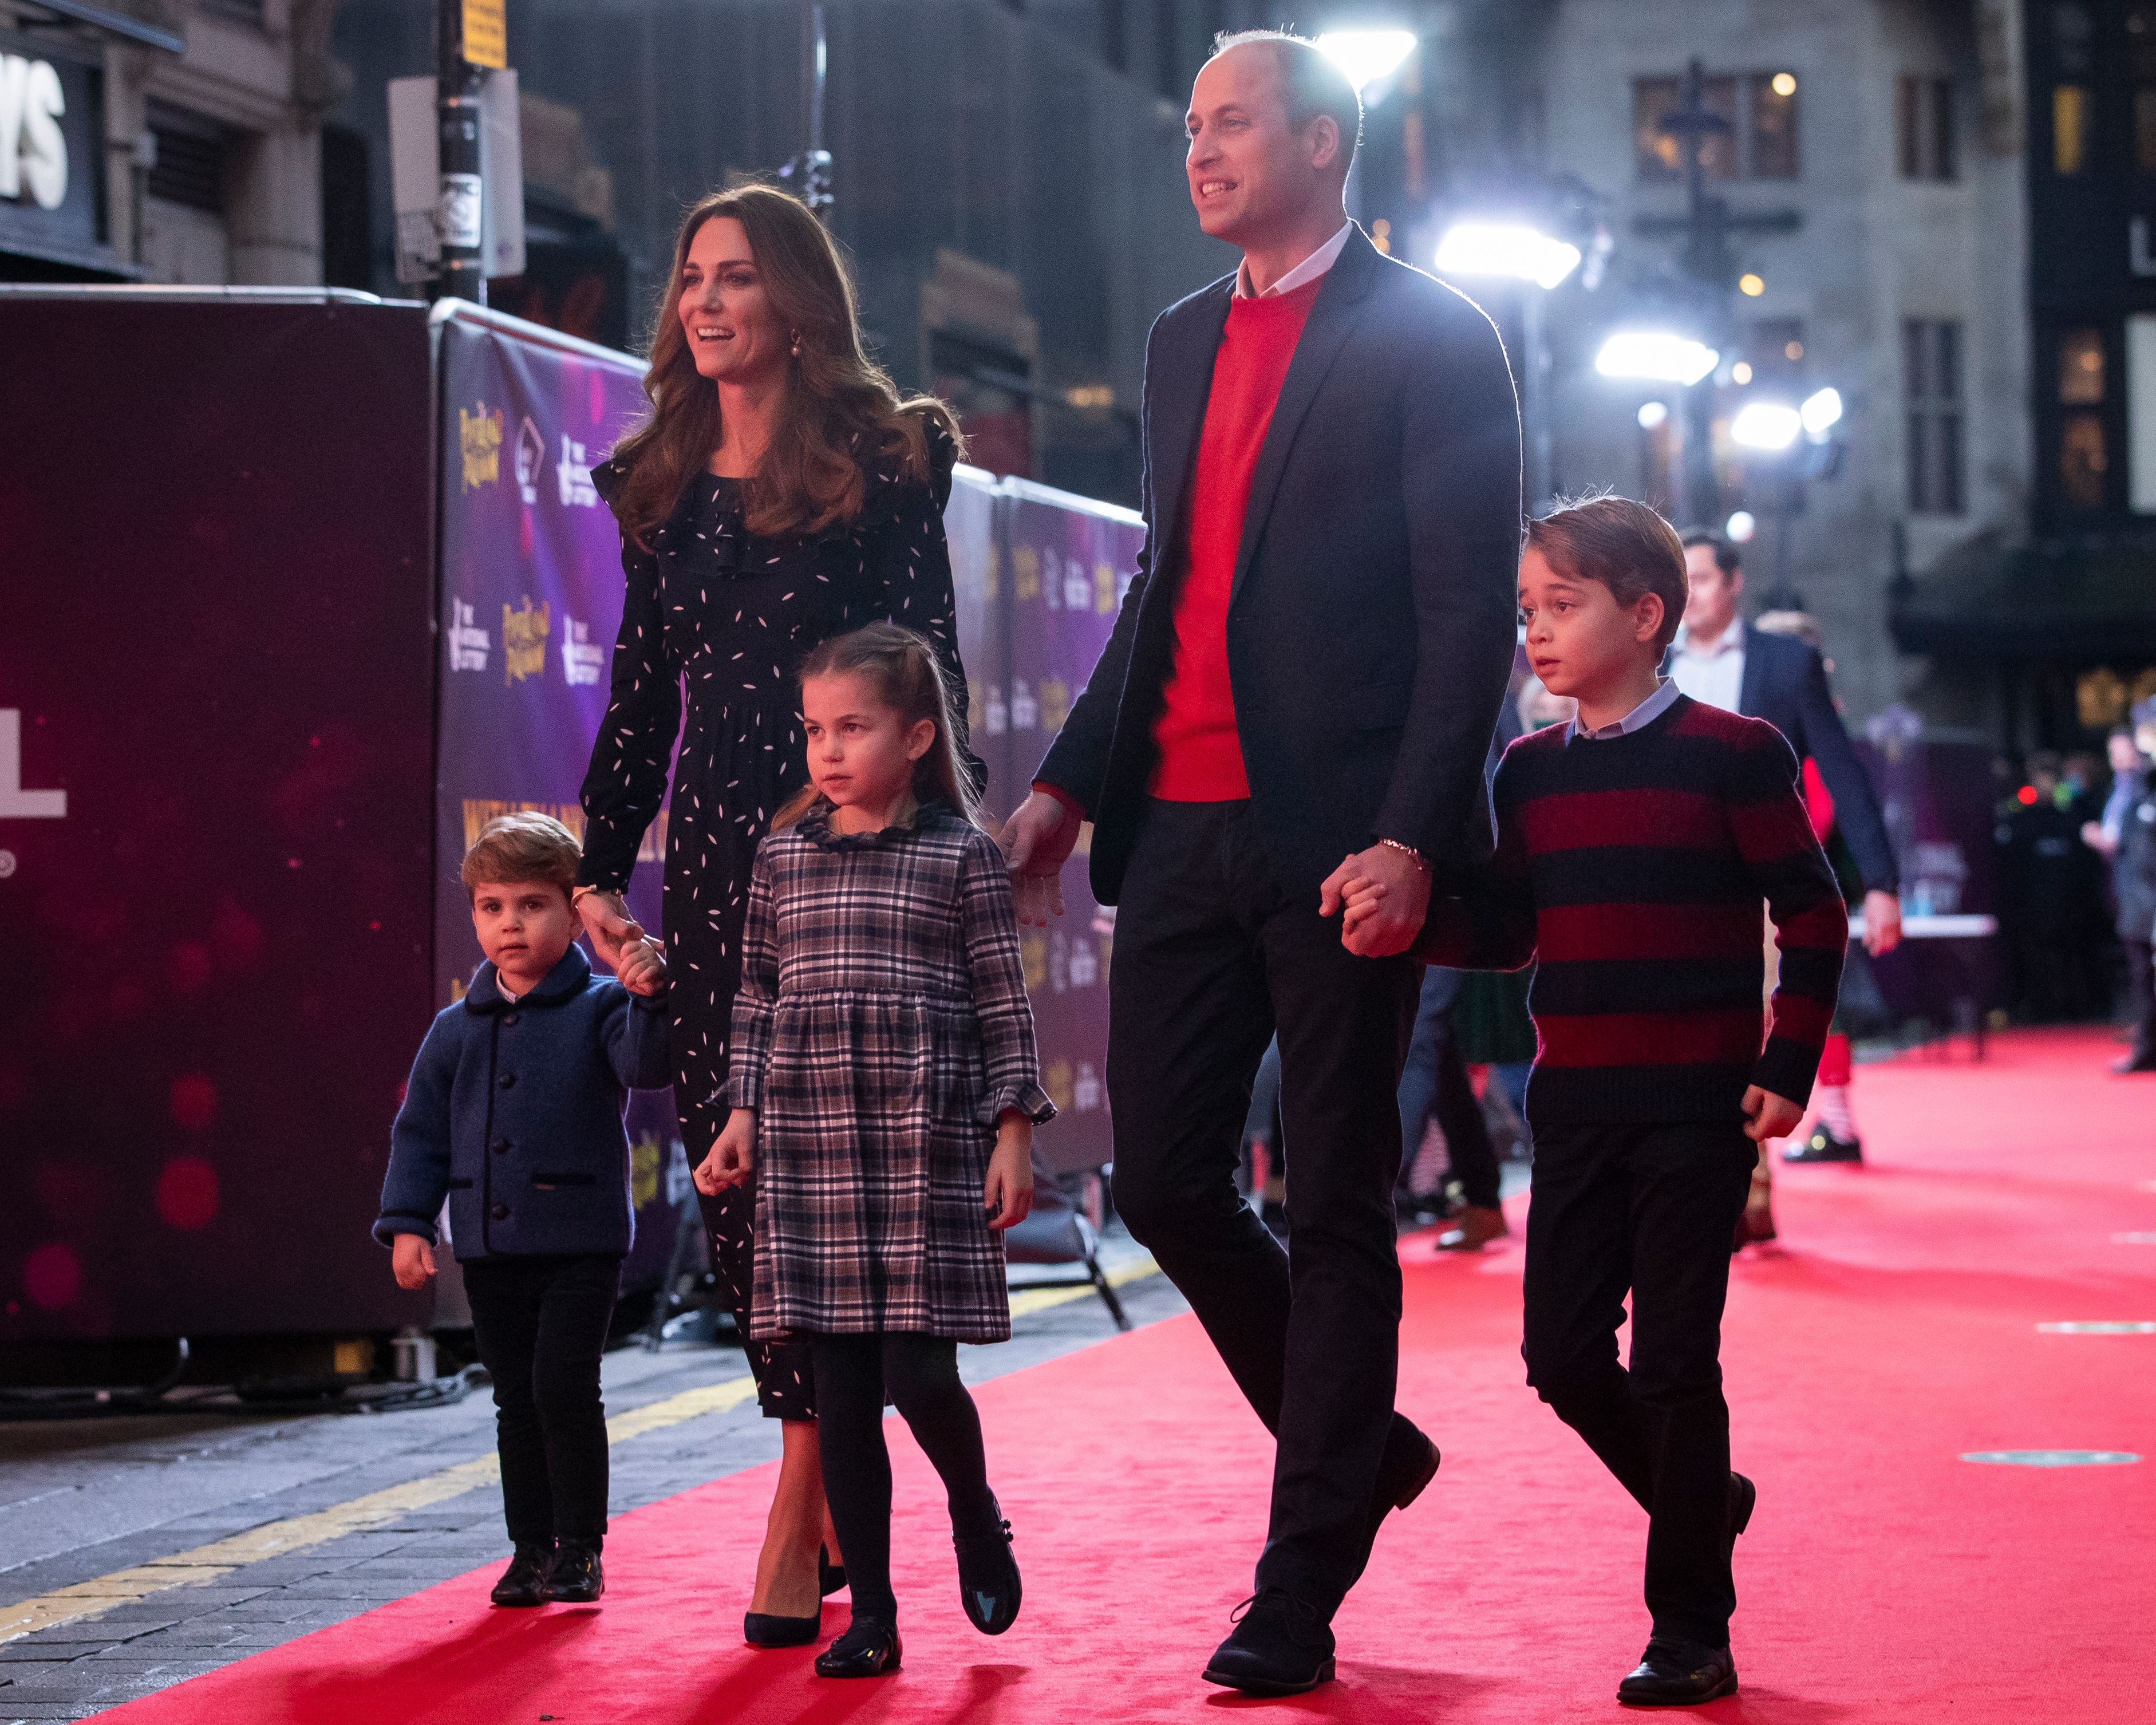 Prince William, Kate Middleton with their children at a special pantomime performance at London's Palladium Theatre, hosted by The National Lottery on December 11, 2020 | Photo: Getty Images